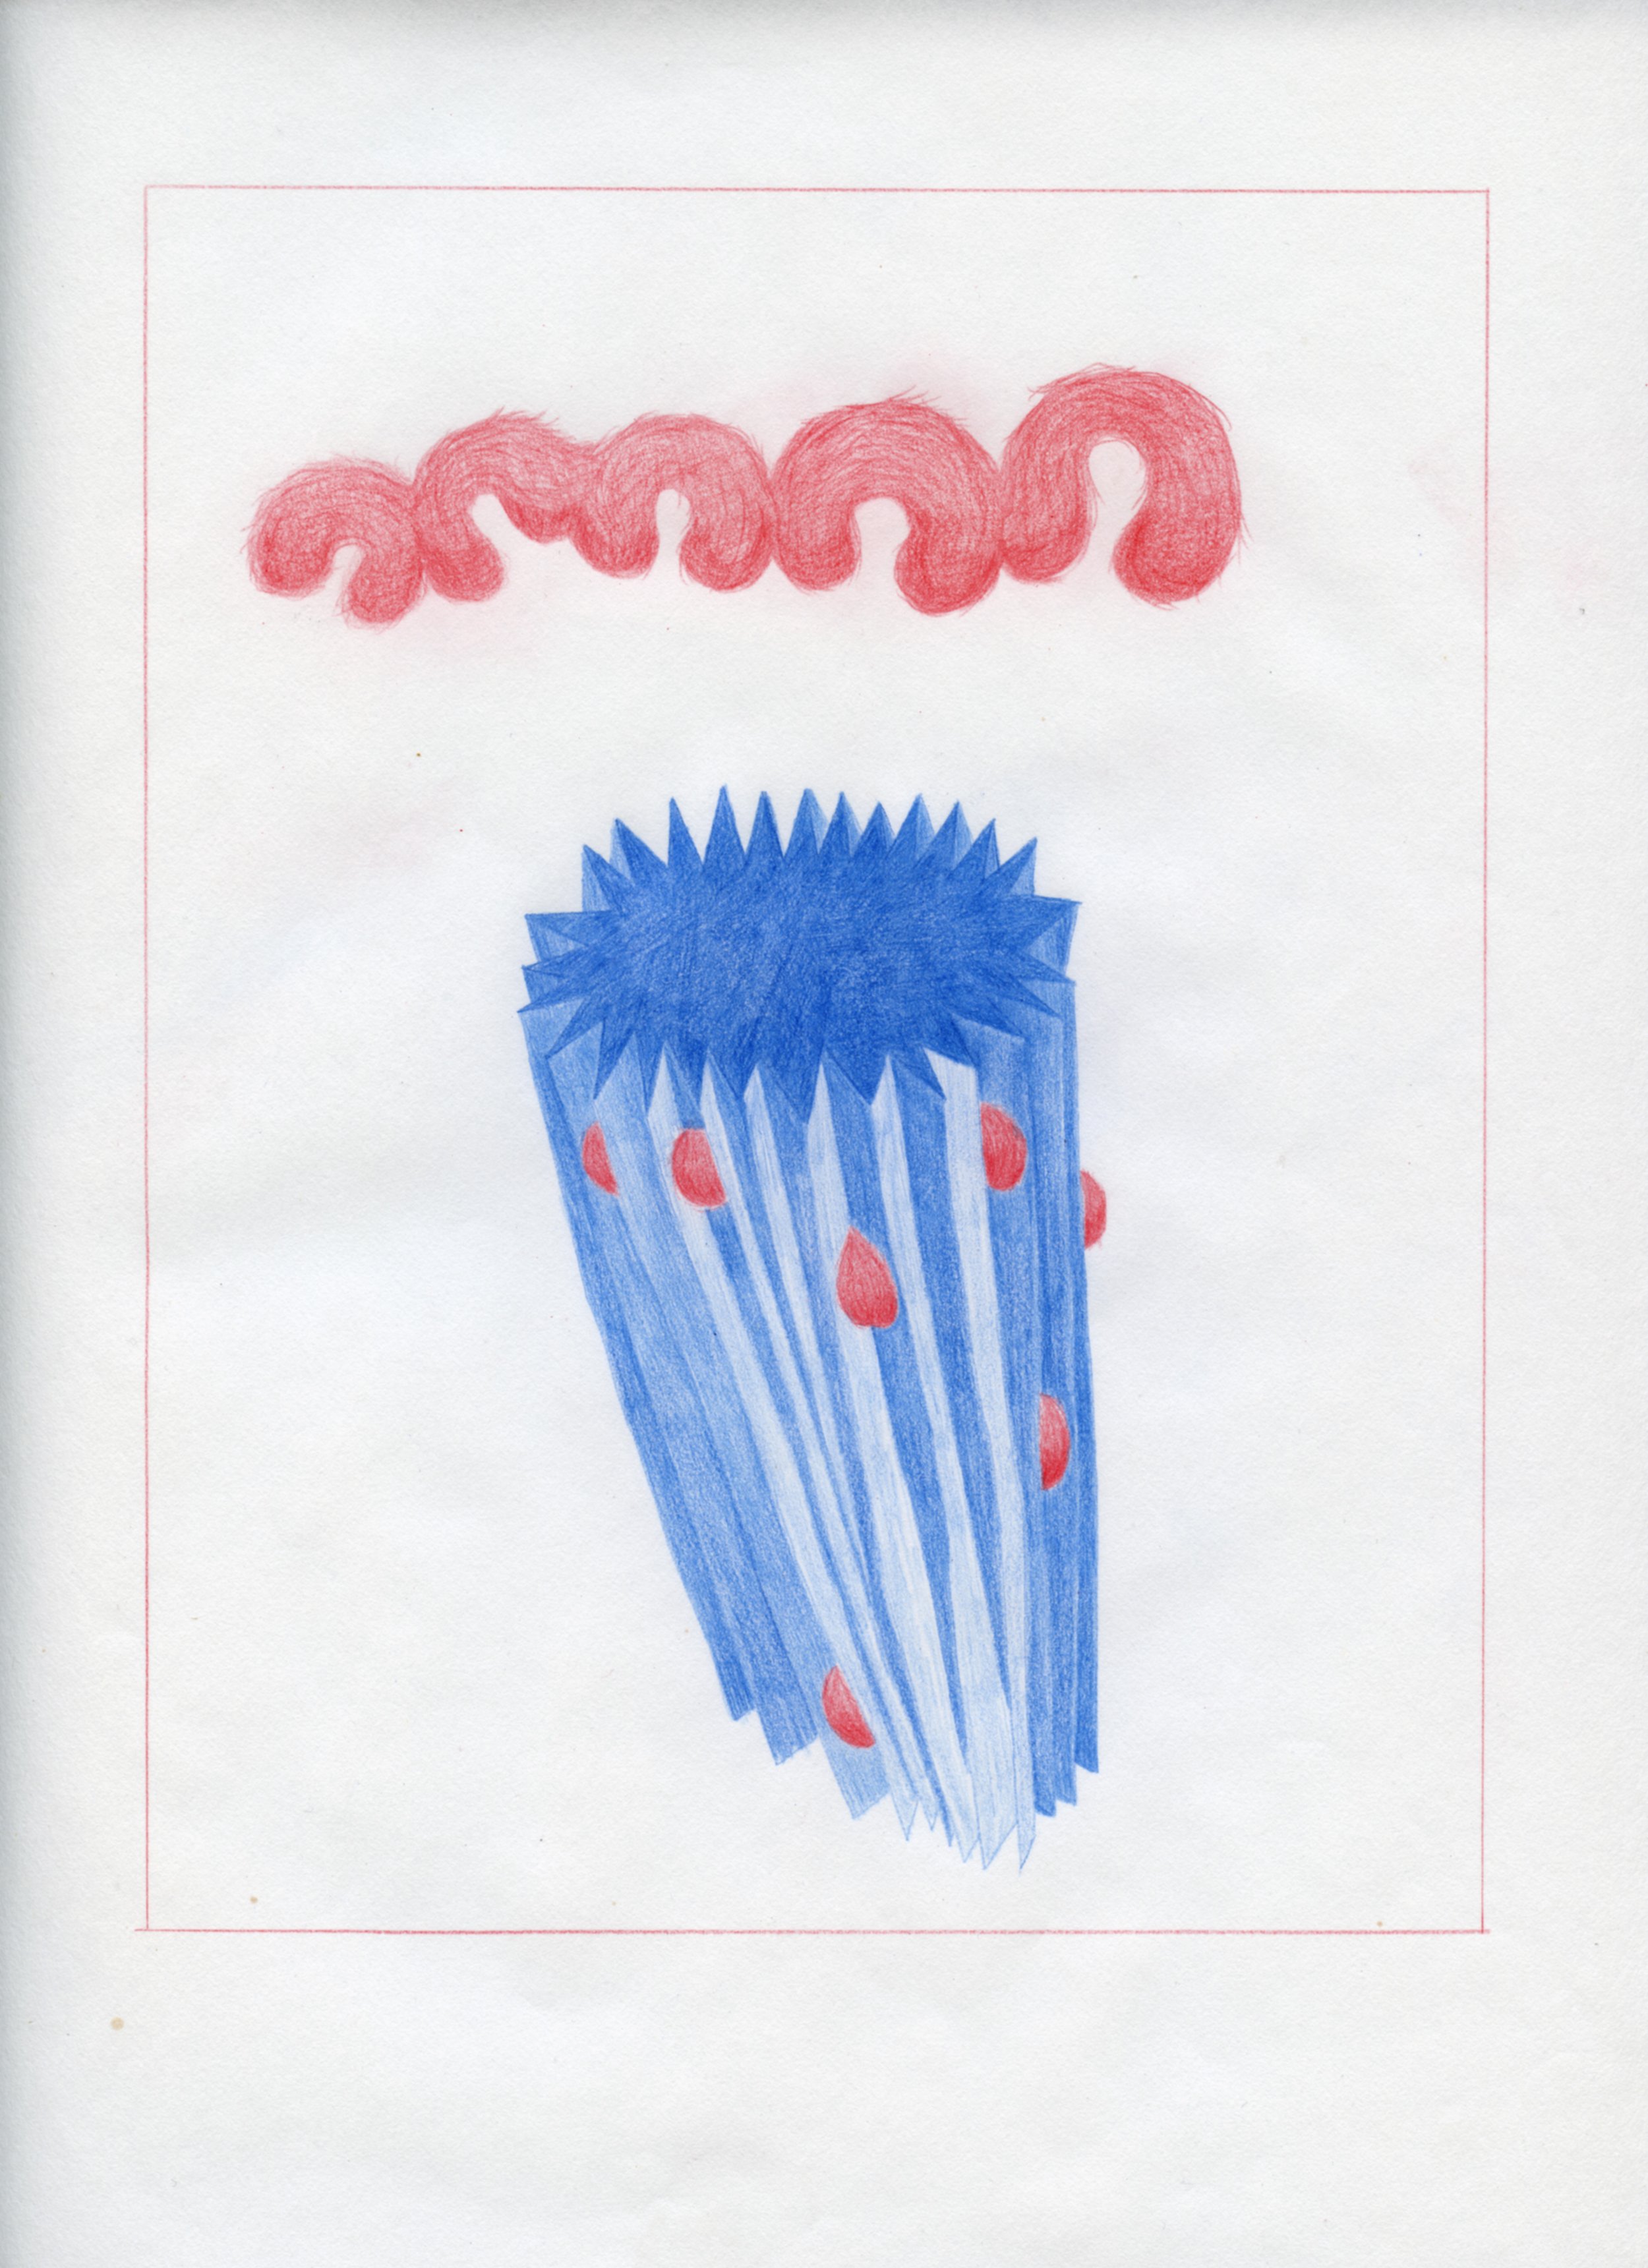  Workplace Drawing #15, 2021, Red and Blue Graphite on Bond Paper, 9”x 12”. 